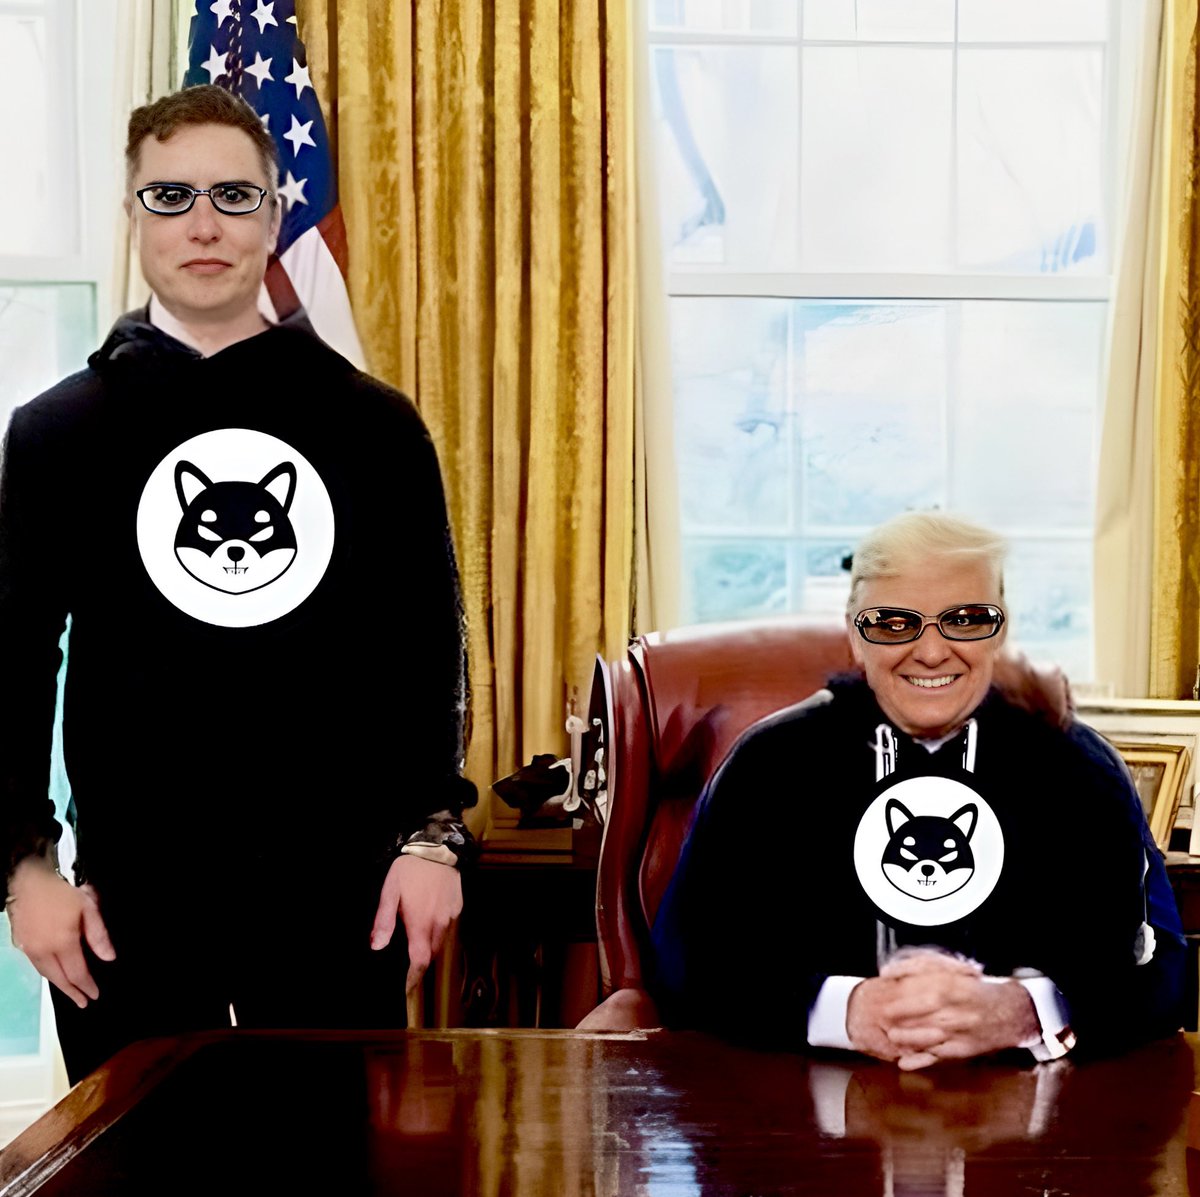 Do you want to see Elon Musk or Donald Trump in #SHIB hoodie #SHIBARMY ? 🤣🔥